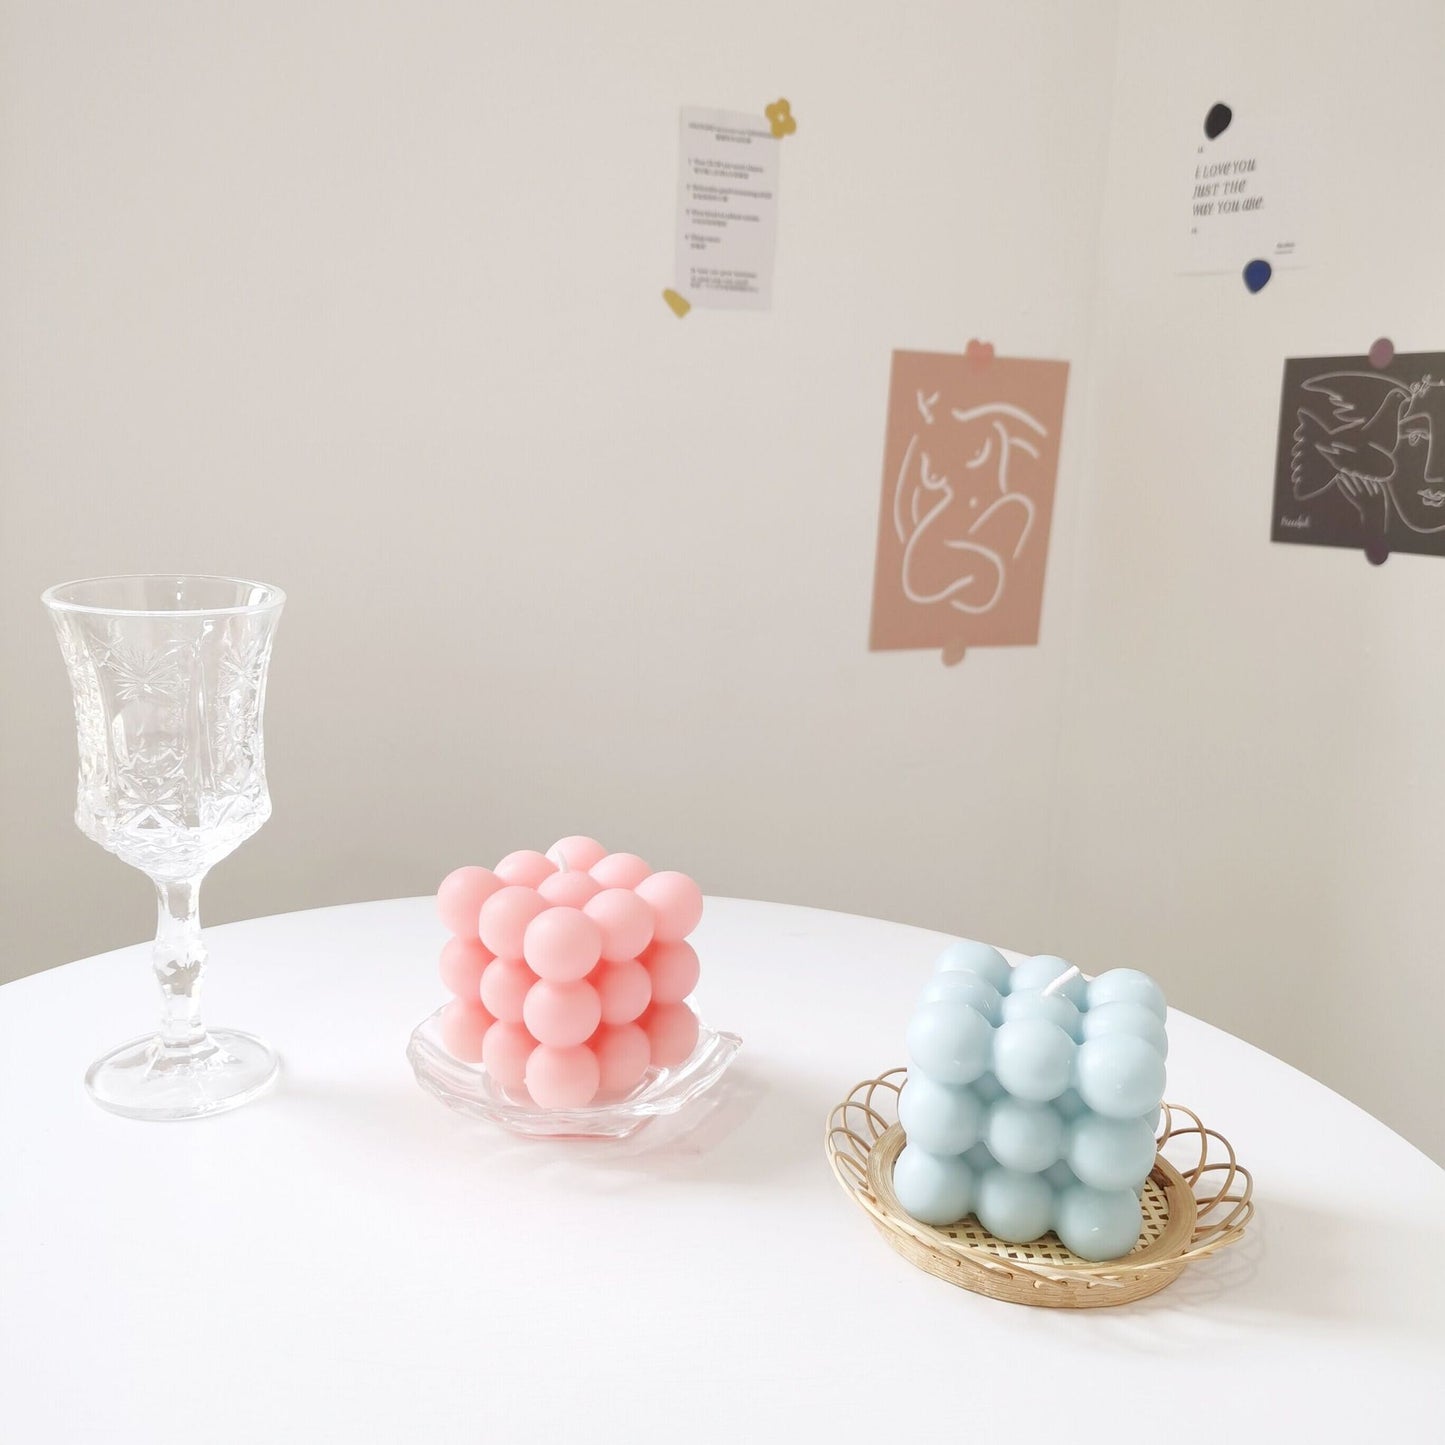 Bubbles Aromatherapy Scented Candles